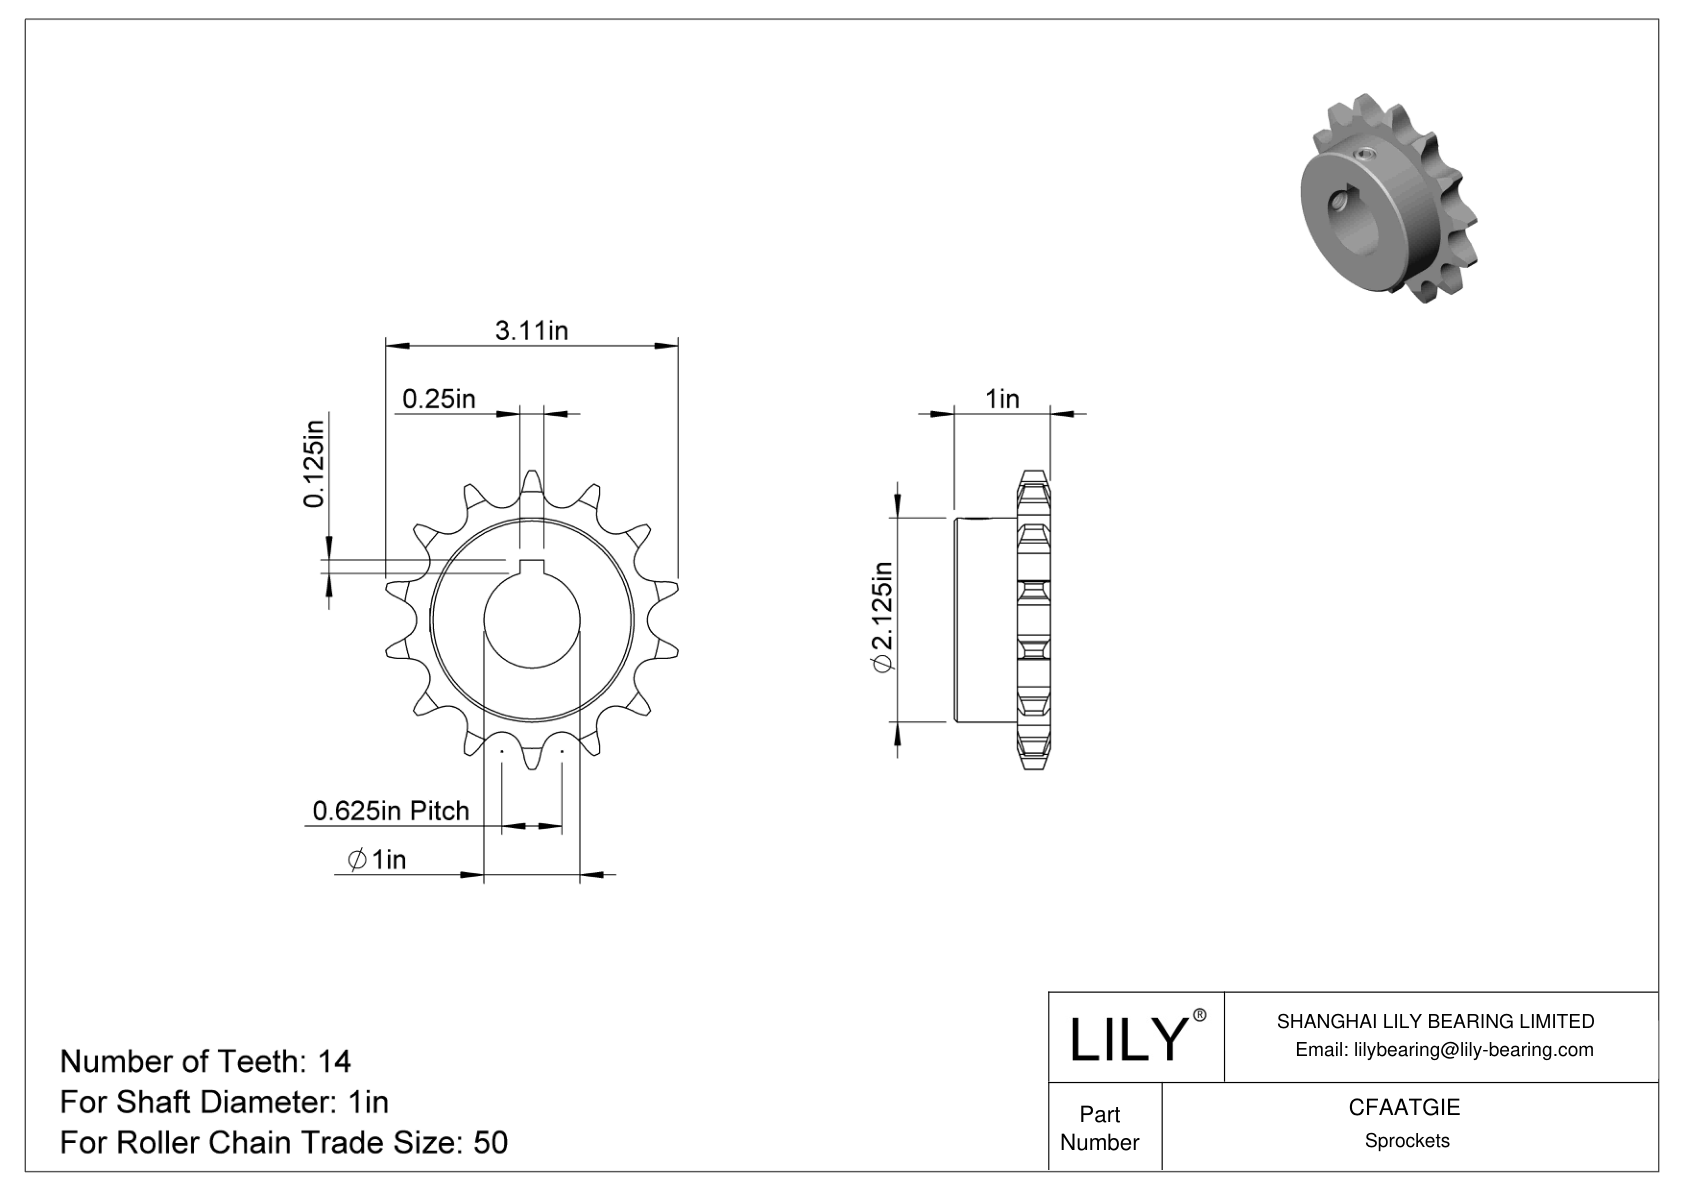 CFAATGIE Wear-Resistant Sprockets for ANSI Roller Chain cad drawing